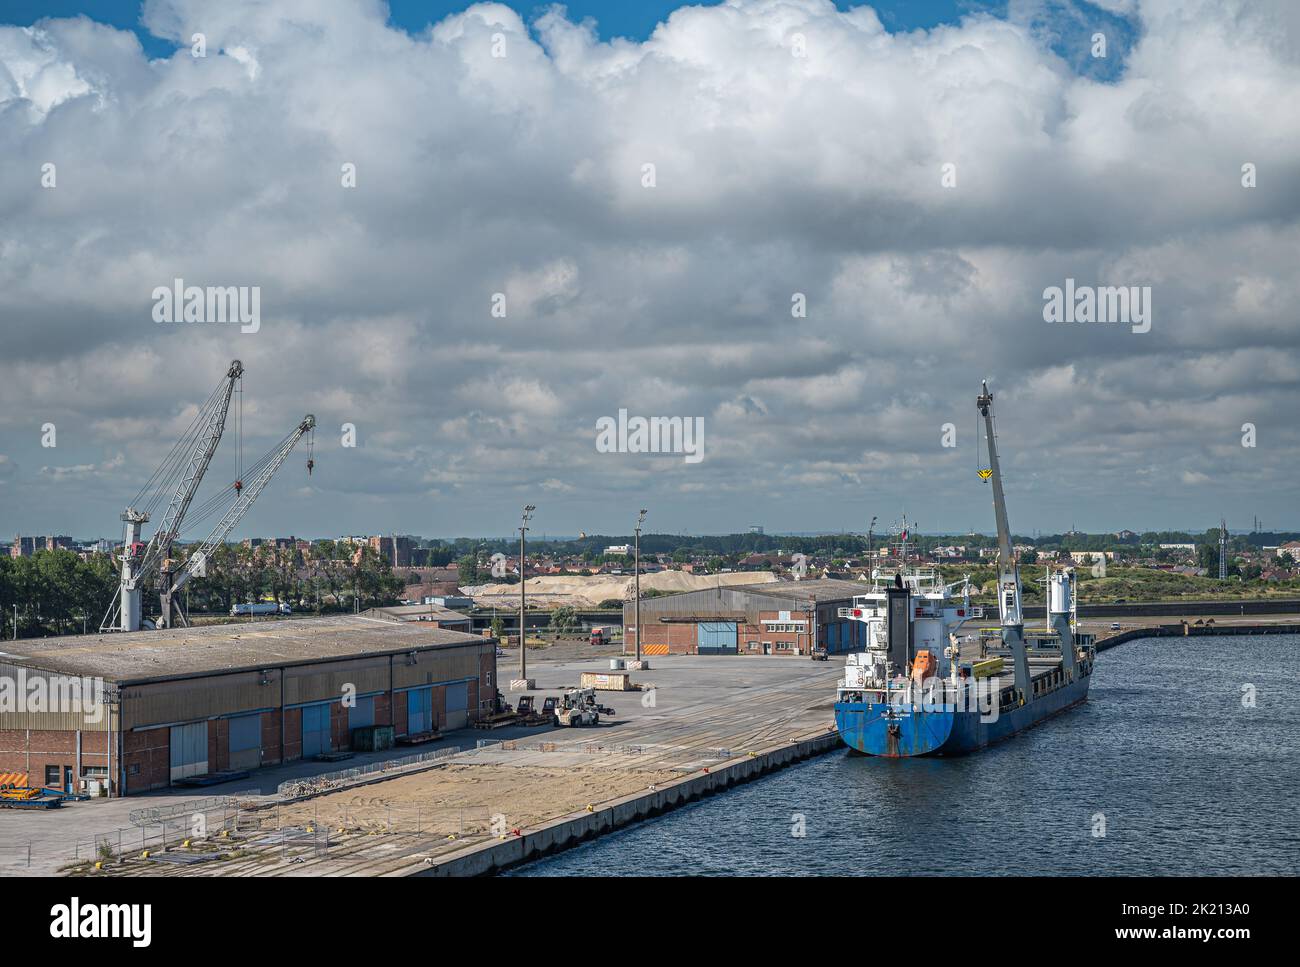 Europe, France, Dunkerque - July 9, 2022: Port scenery. Blue-white Challenger general cargo ship with its own cranes docked on quay 5 under thick clou Stock Photo